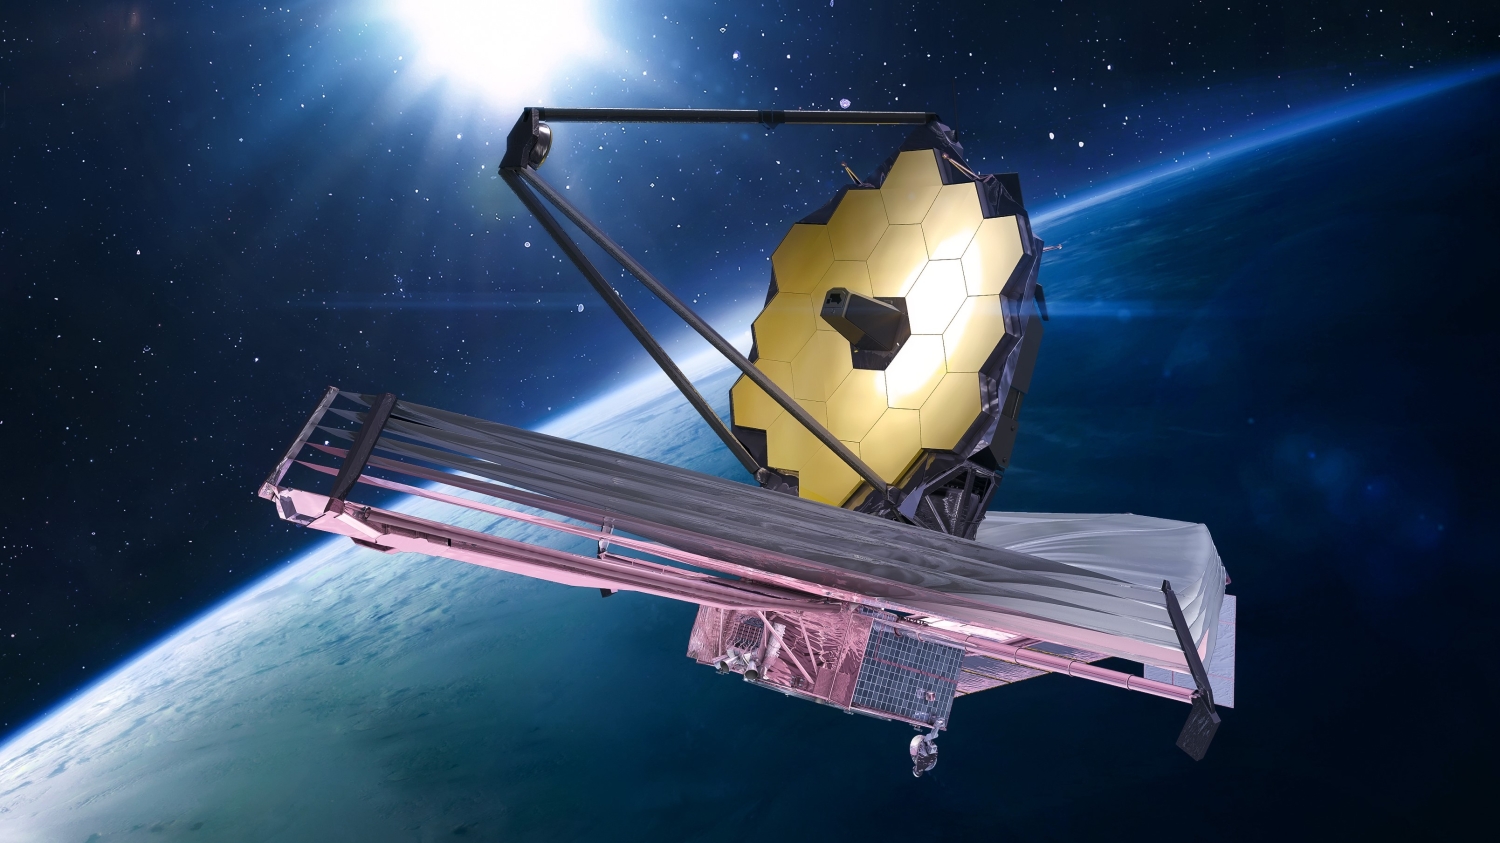 NASA’s Webb telescope makes breakthrough discovery out in deep space